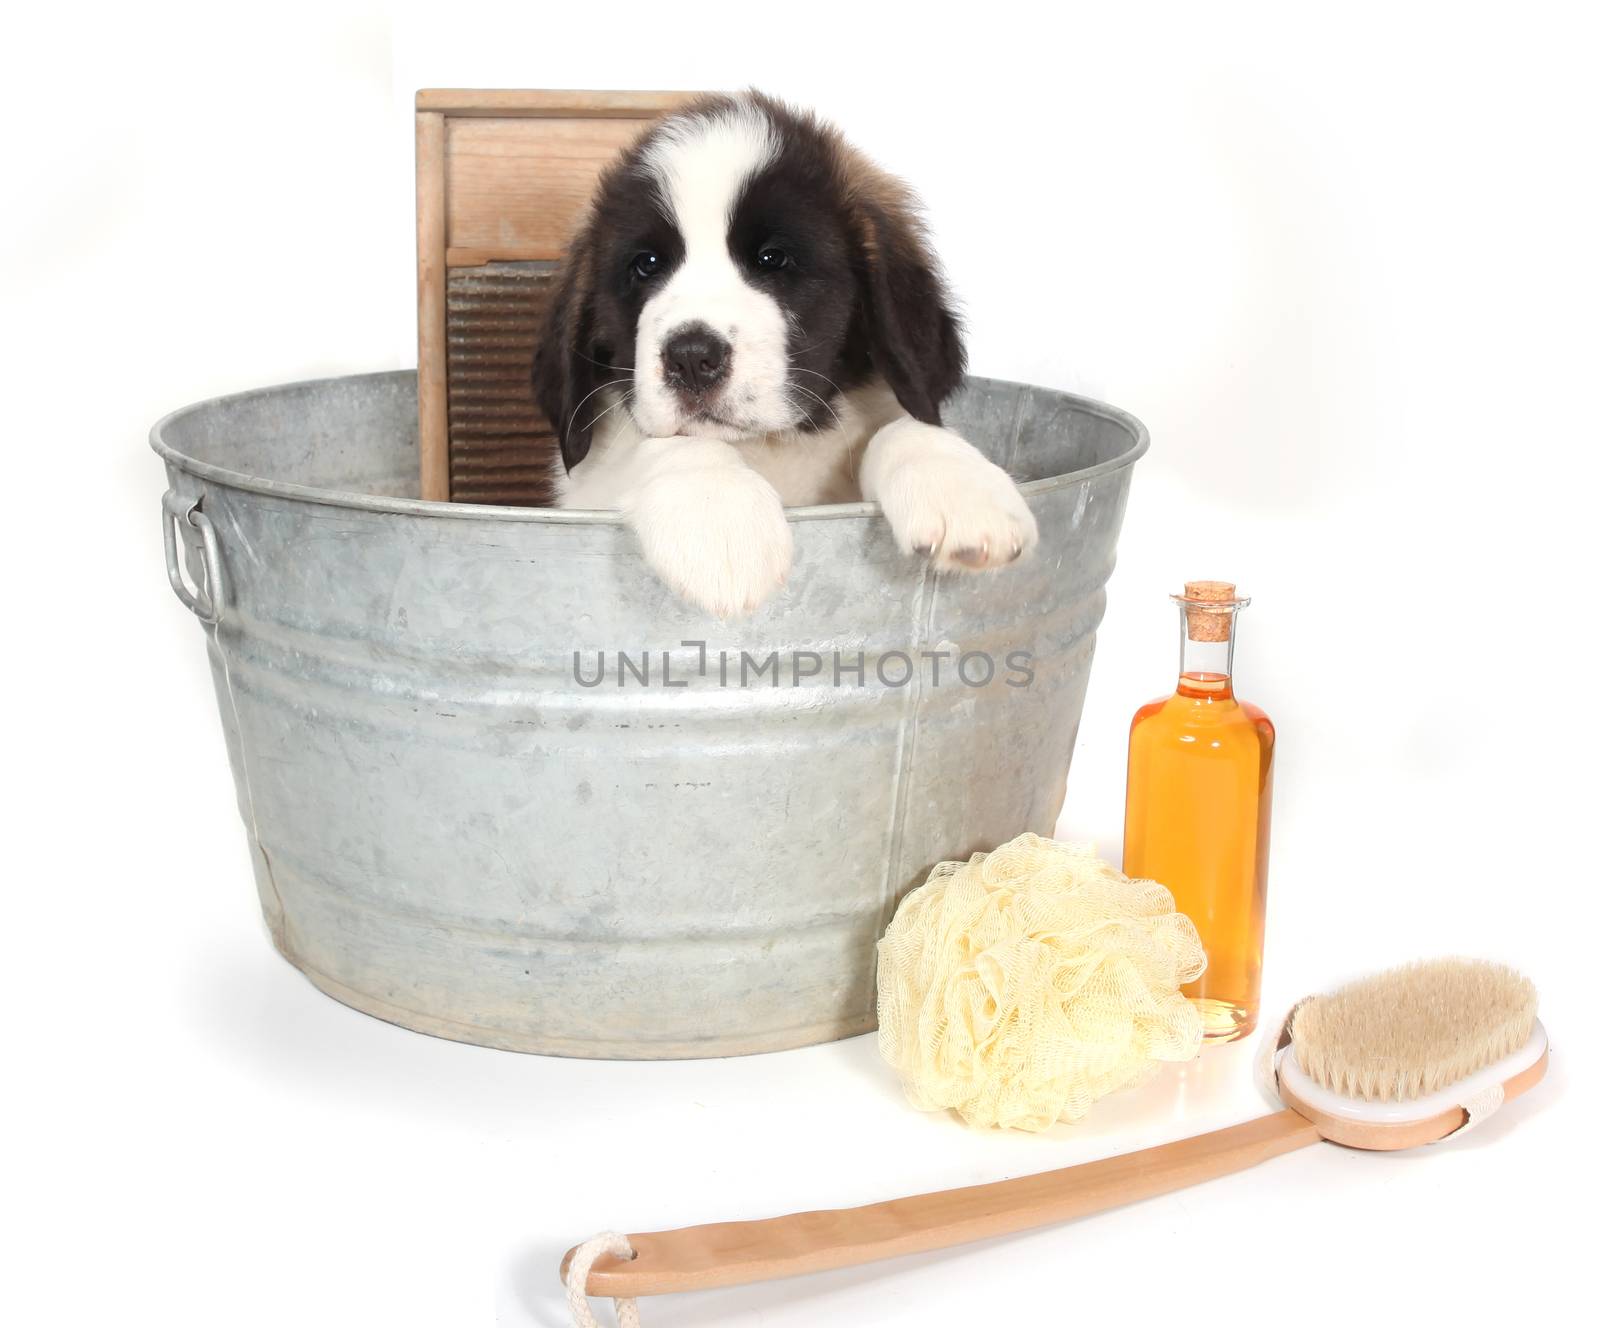 Small Saint Bernard Puppy in a Washtub for Bath Time on White Background